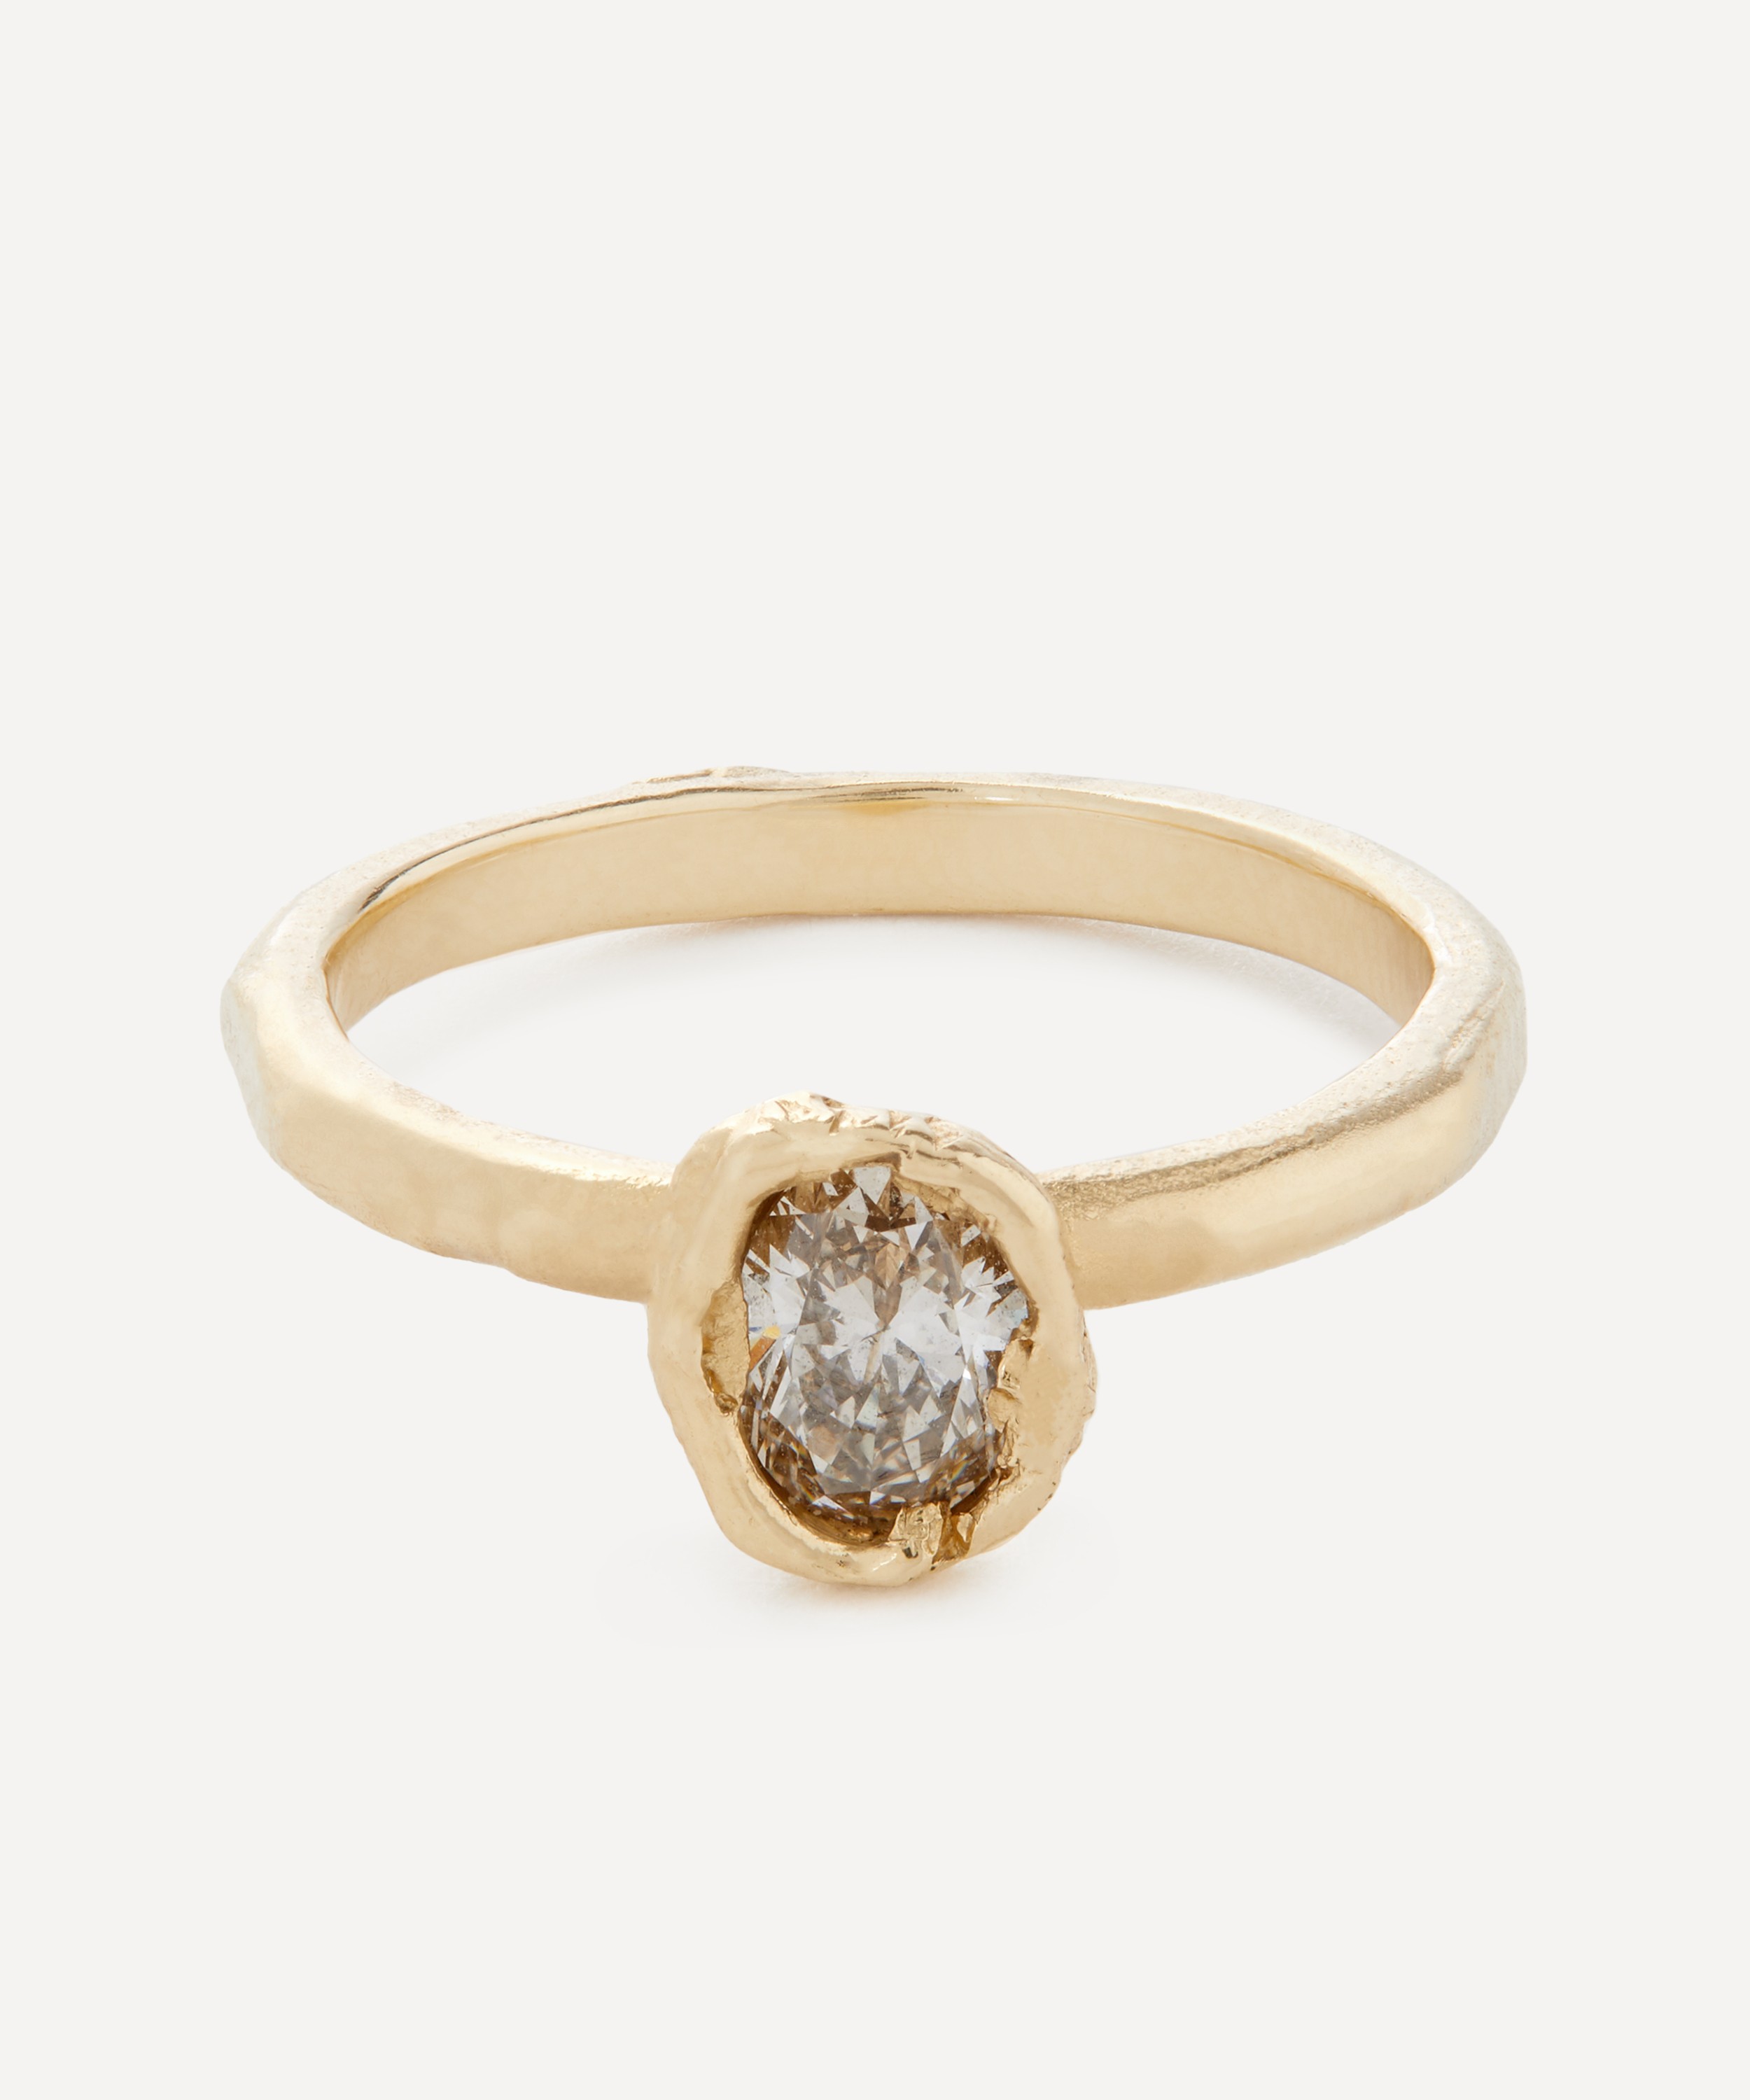 Ellis Mhairi Cameron - 14ct Gold Oval Pale Champagne Diamond Engagement Ring image number 0